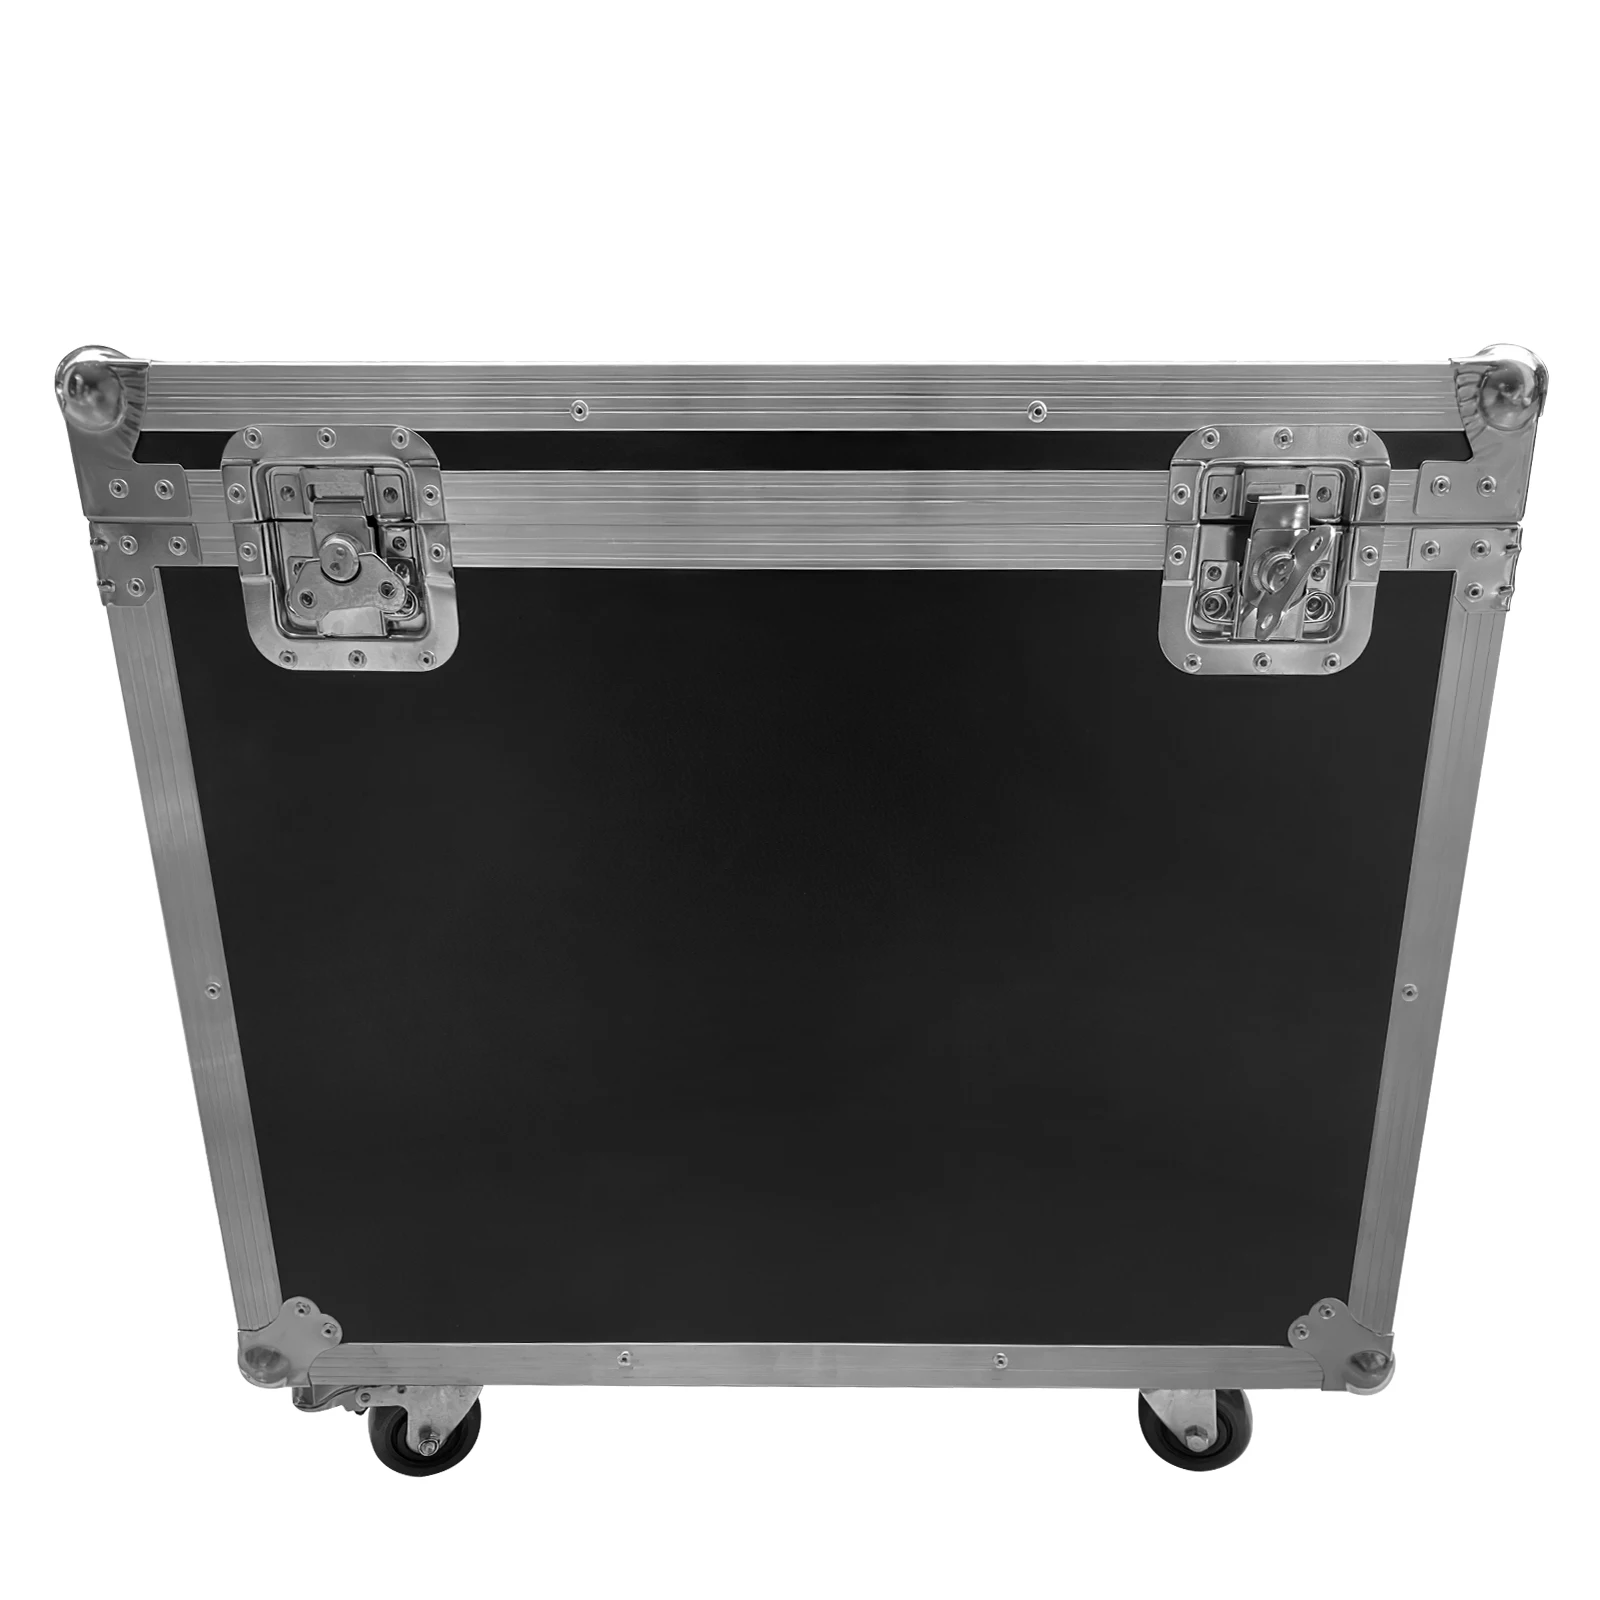 HOLDLAMP Gator Cases G-Tour Style Case for 2 230W Beam Gobo Trigeminal Three-in-one Moving Head Light